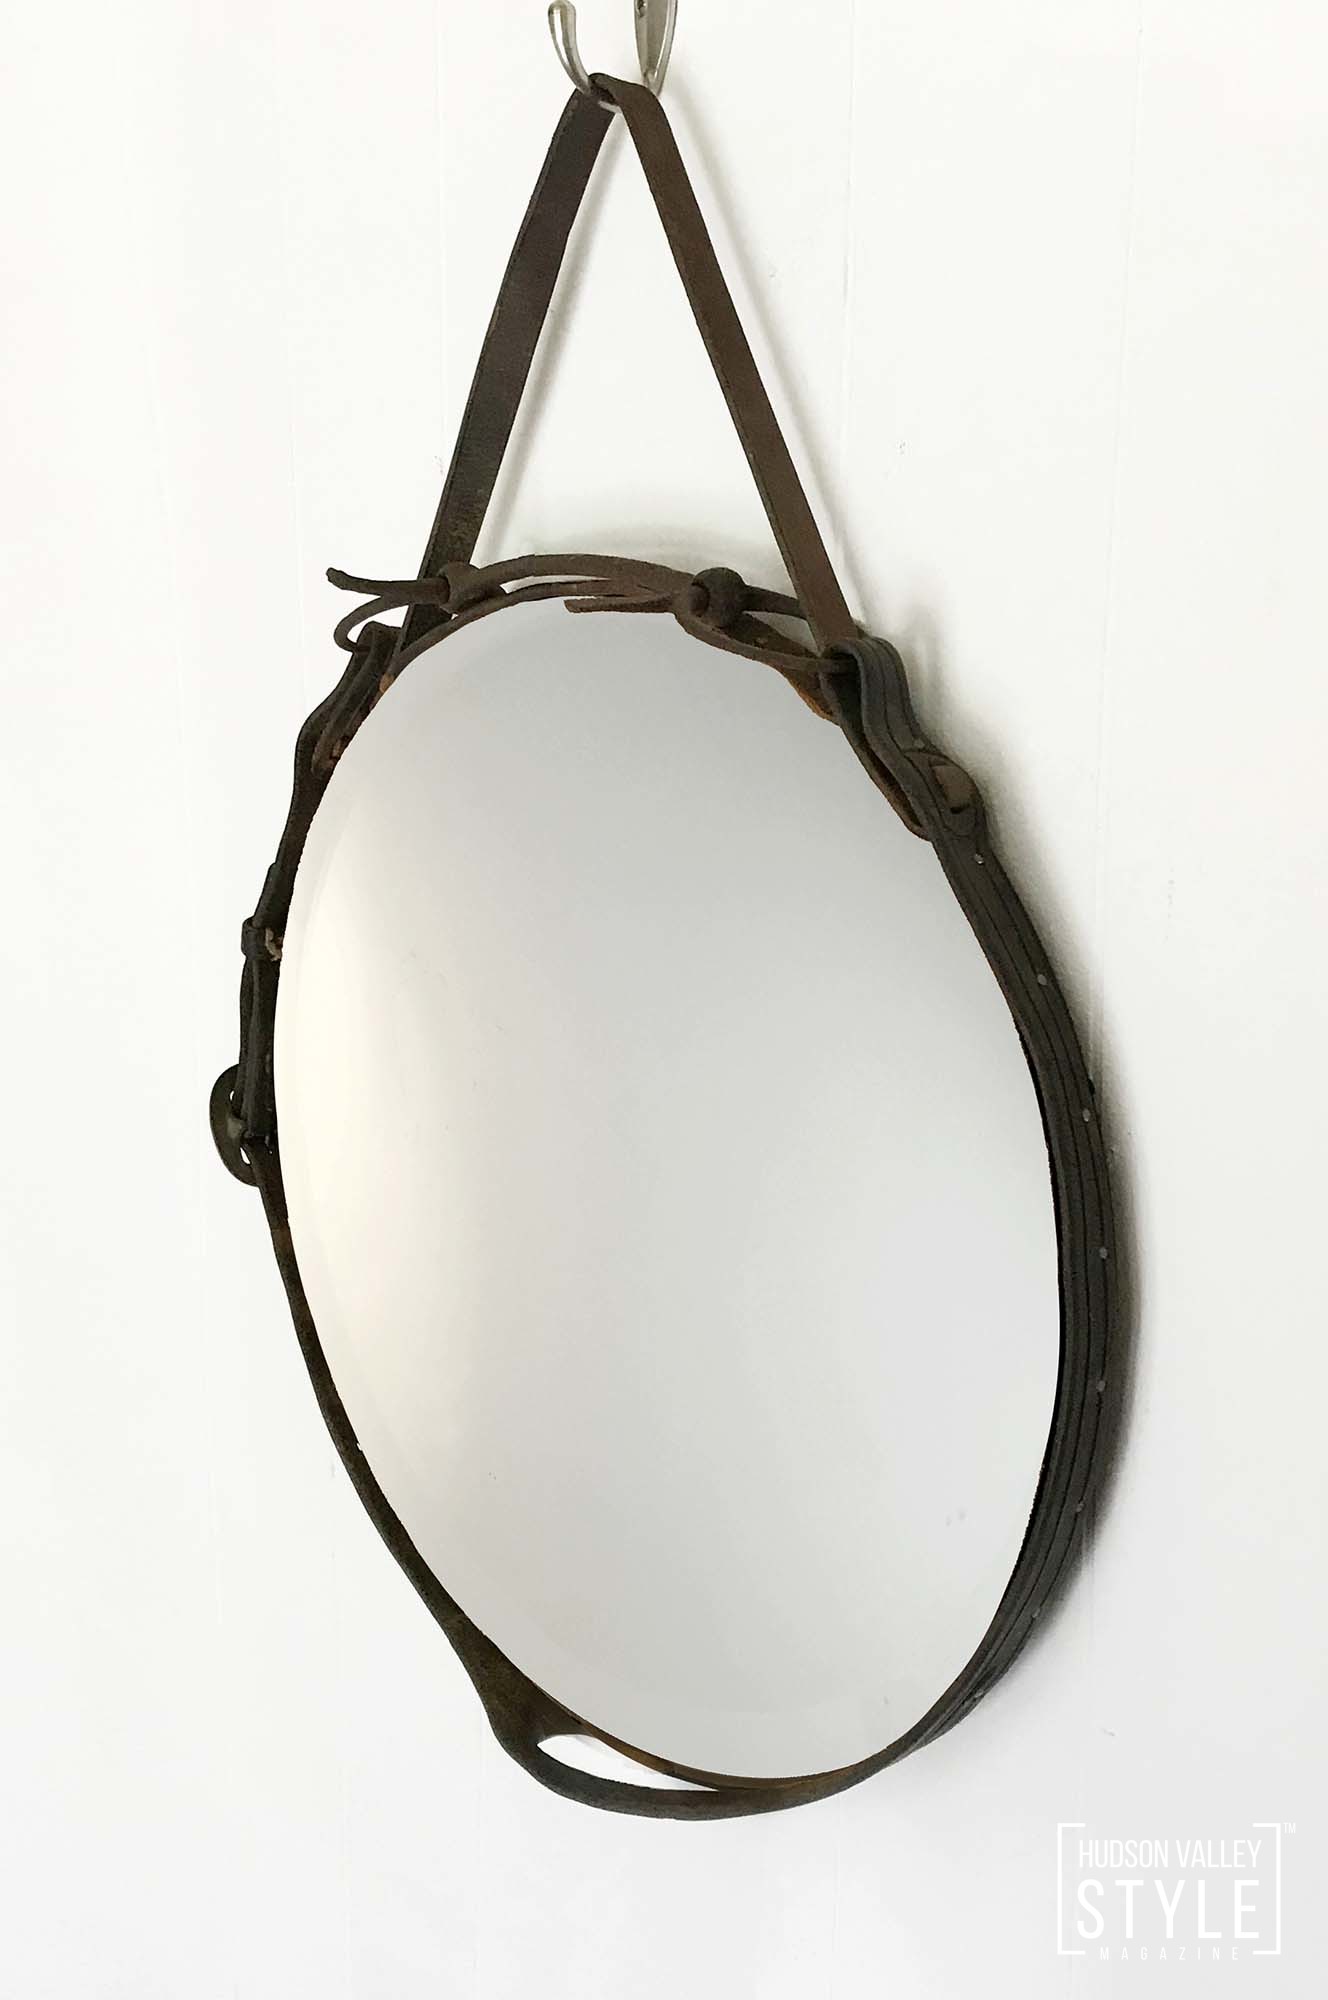 Half-Cheek Curb Bit Equestrian Leather Mirror Hand-tacked vintage bridle leather found in Upstate New York. Mirror hangs from a black iron half-cheek curb horse bit. Dimensions: 16.5” diameter x 1.25” deep. Snaffle bit cheek pieces extend approximately 2.5” from the front of the mirror frame. Leather hanging strap extends approximately 4.5" from the top of the mirror frame. $155